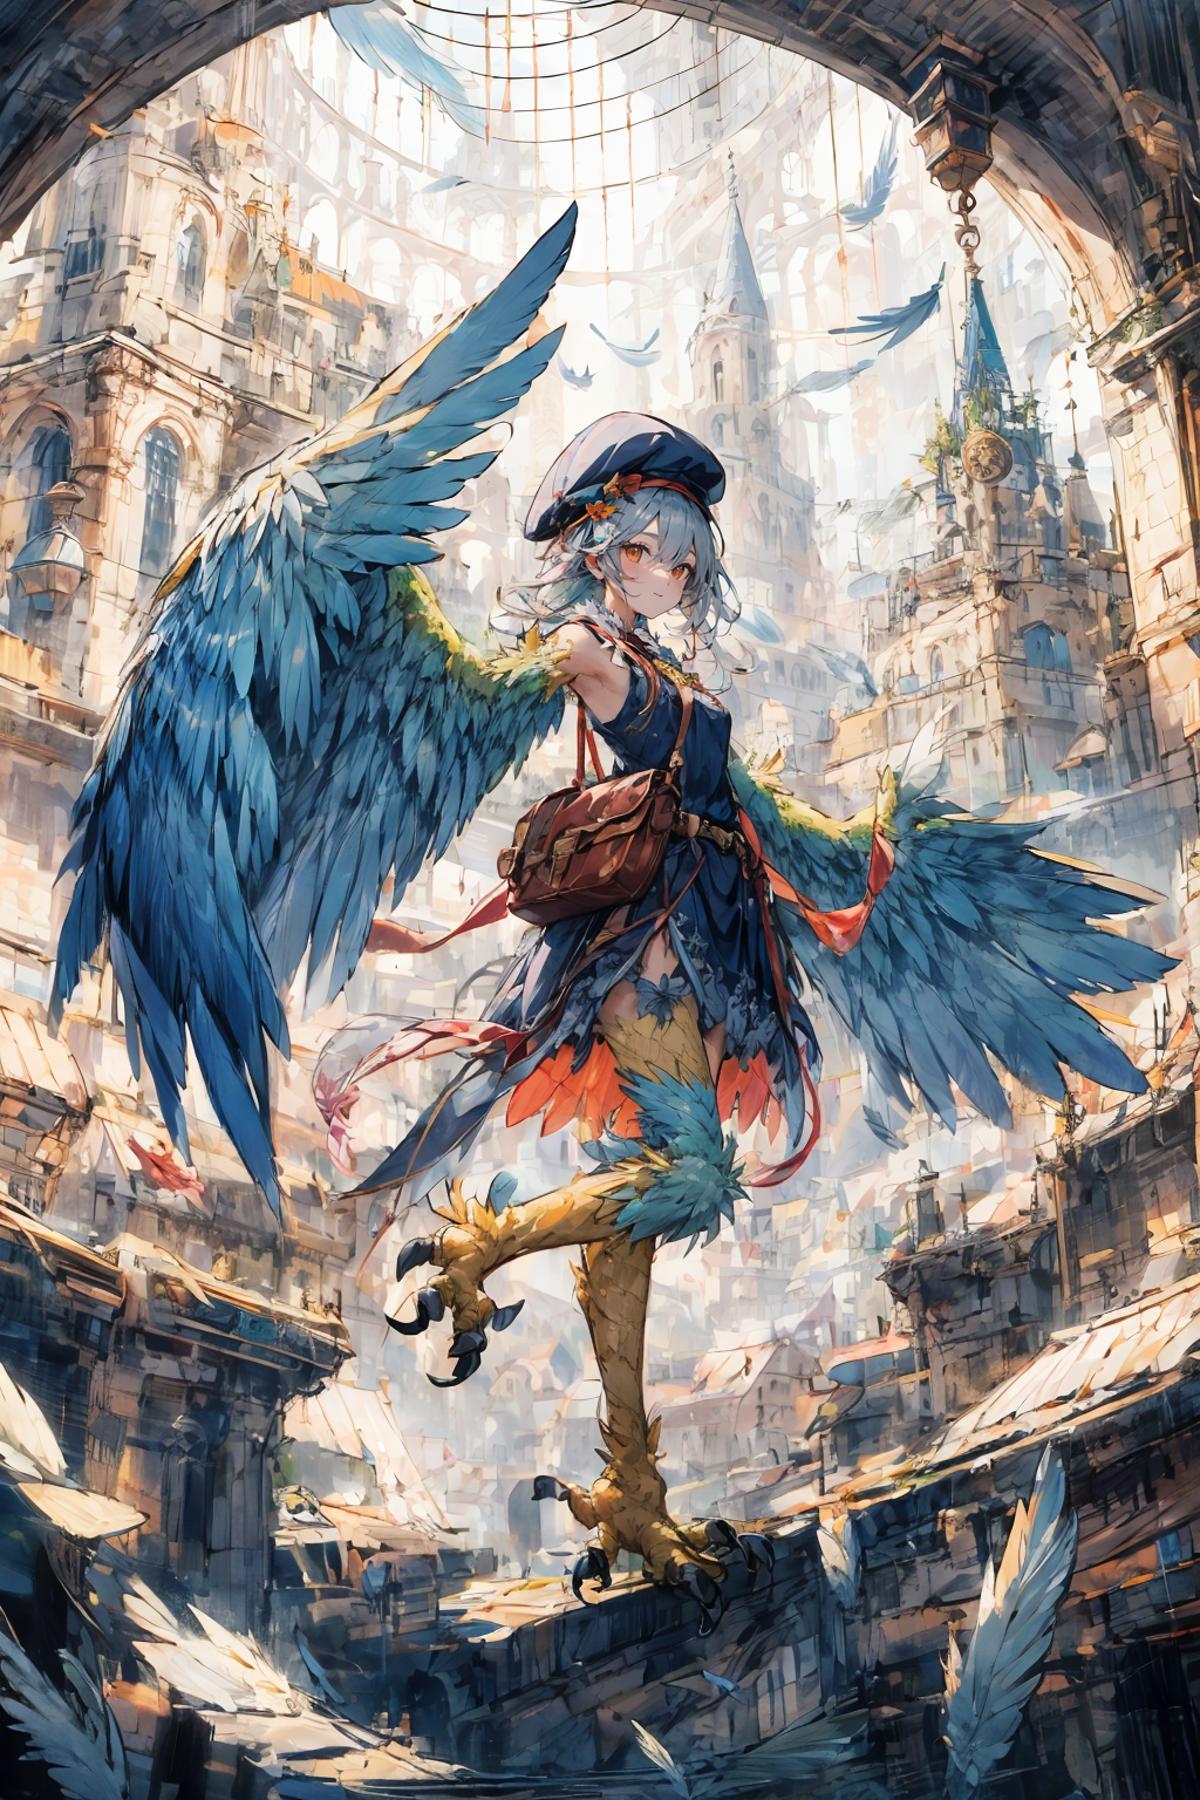 A painting of a woman with wings, holding a handbag, standing in a city with a castle-like structure in the background.